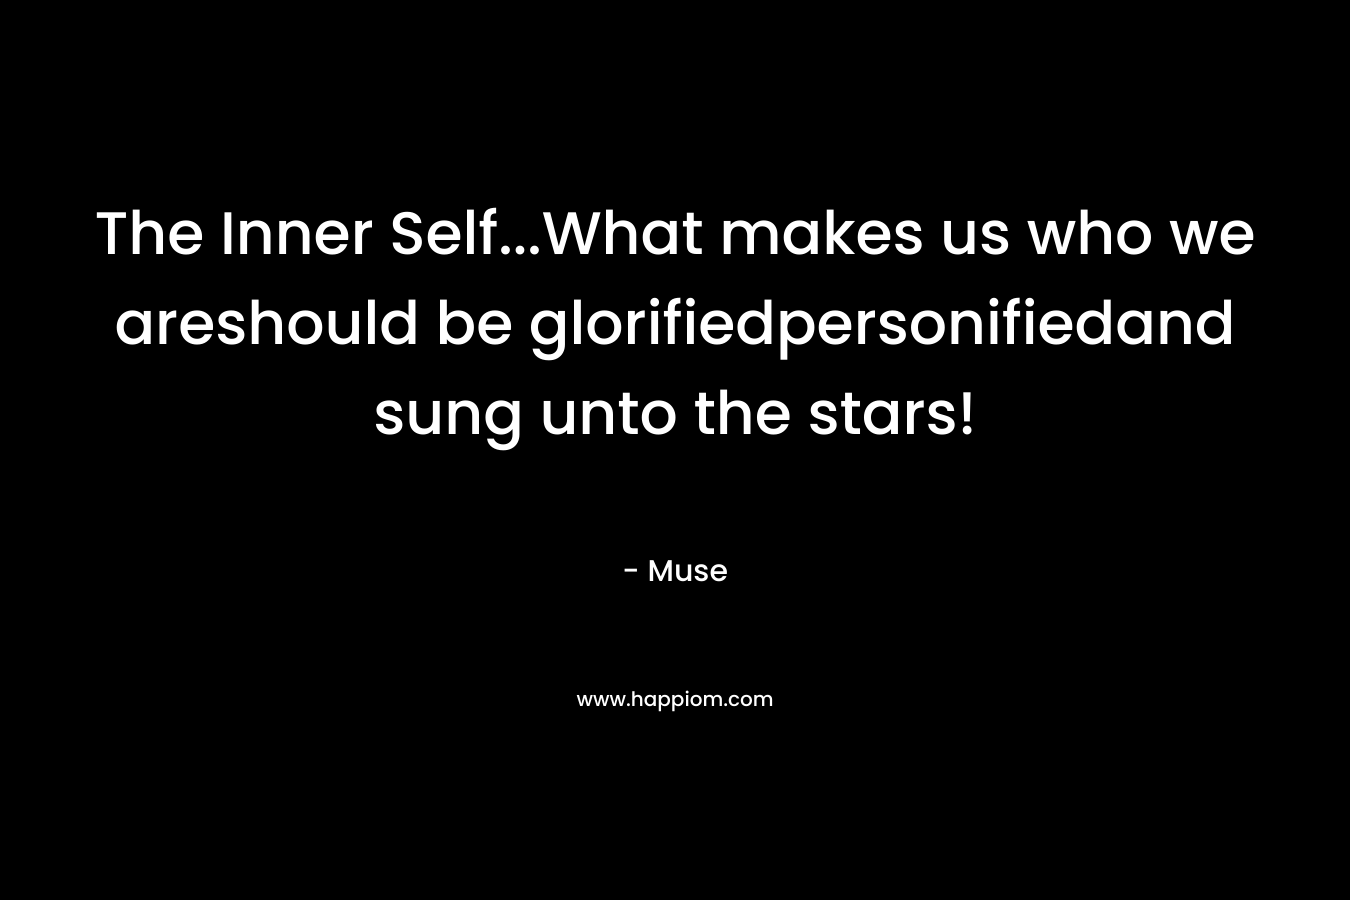 The Inner Self...What makes us who we areshould be glorifiedpersonifiedand sung unto the stars!